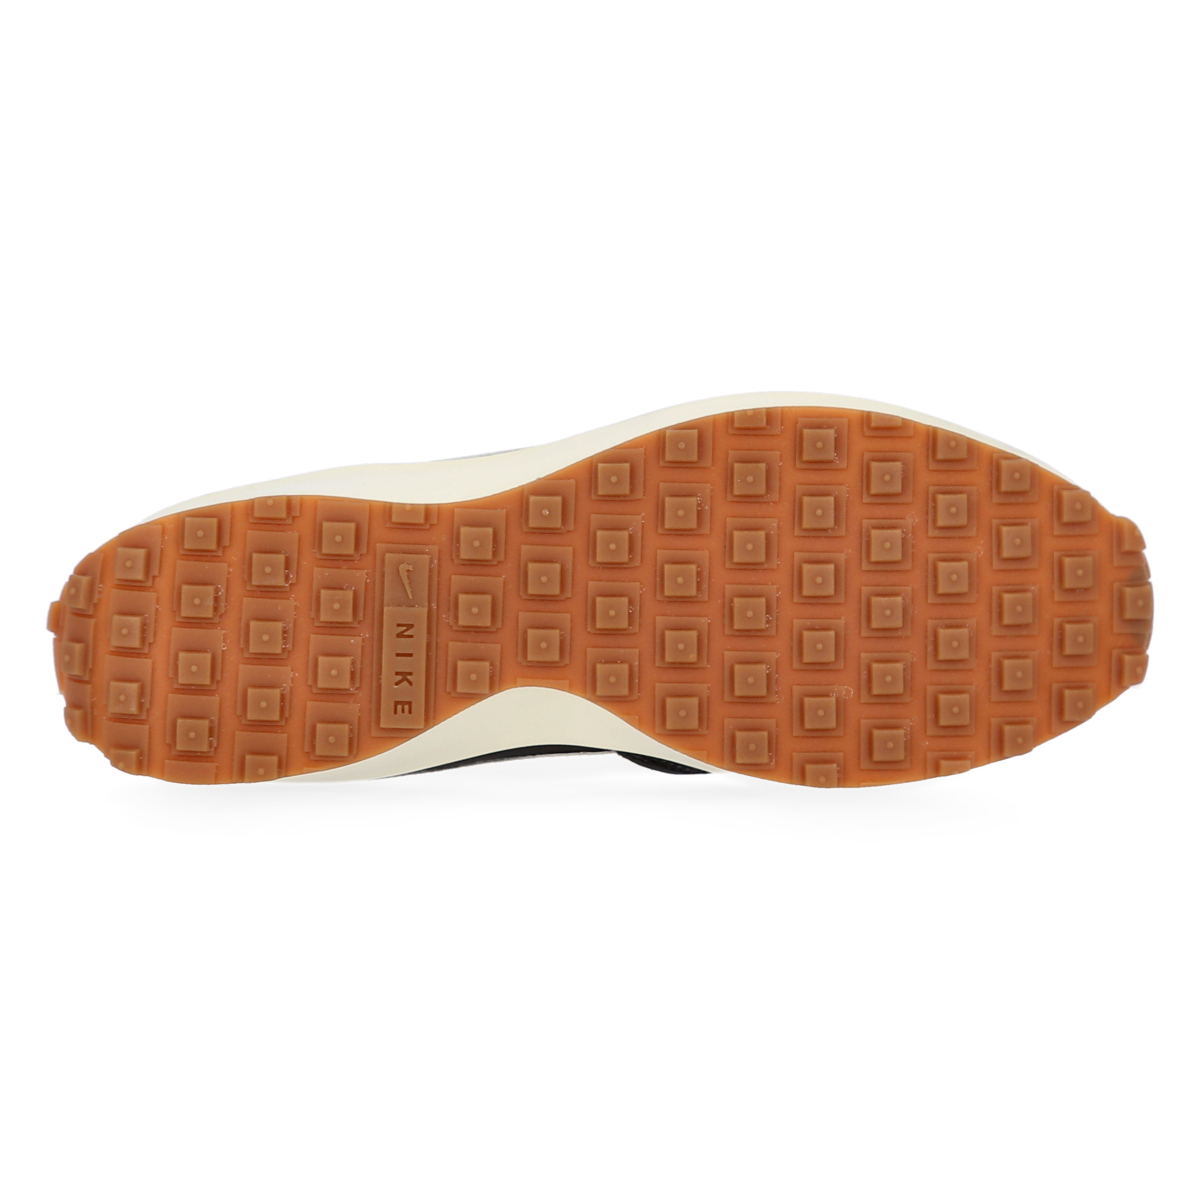 Zapatillas Nike Waffle Debut Premium Hombre,  image number null